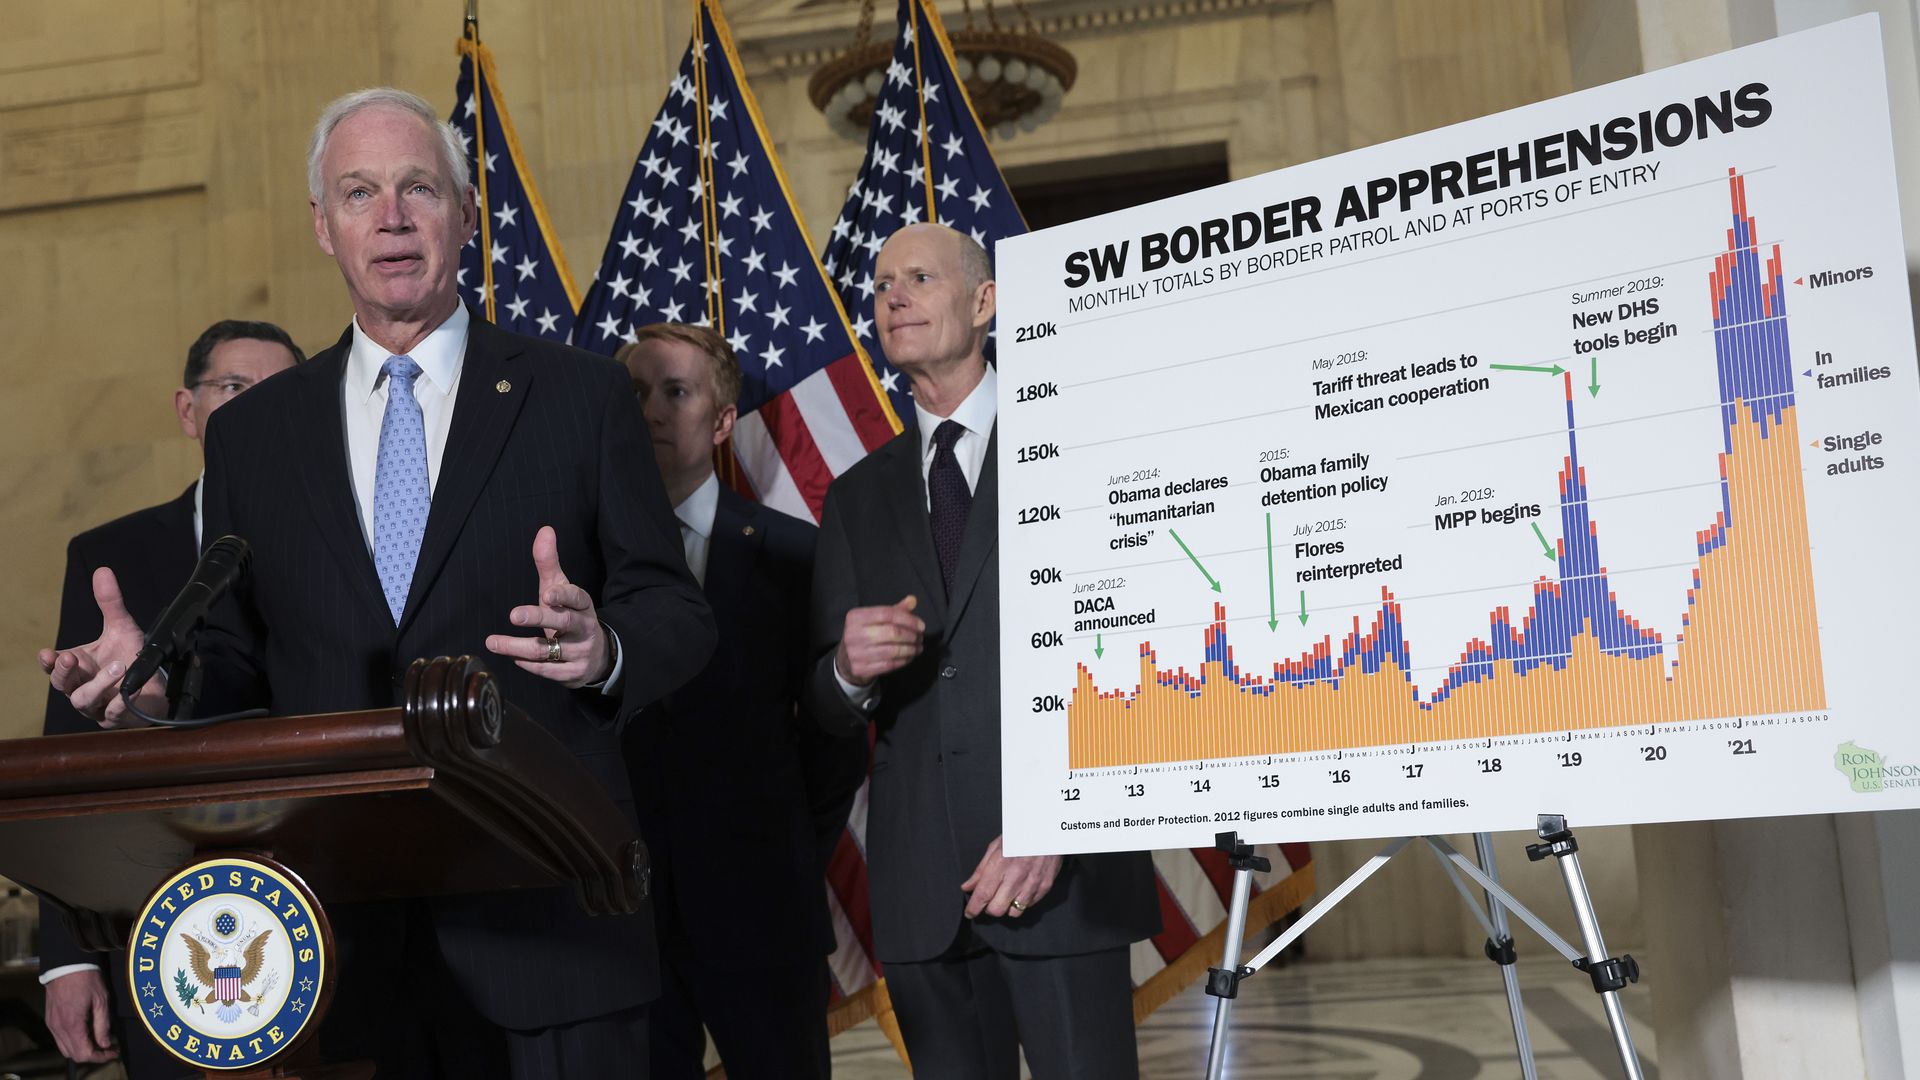 Sens. Ron Johnson and Rick Scott are seen at a news conference complaining about the growth in border apprehensions.